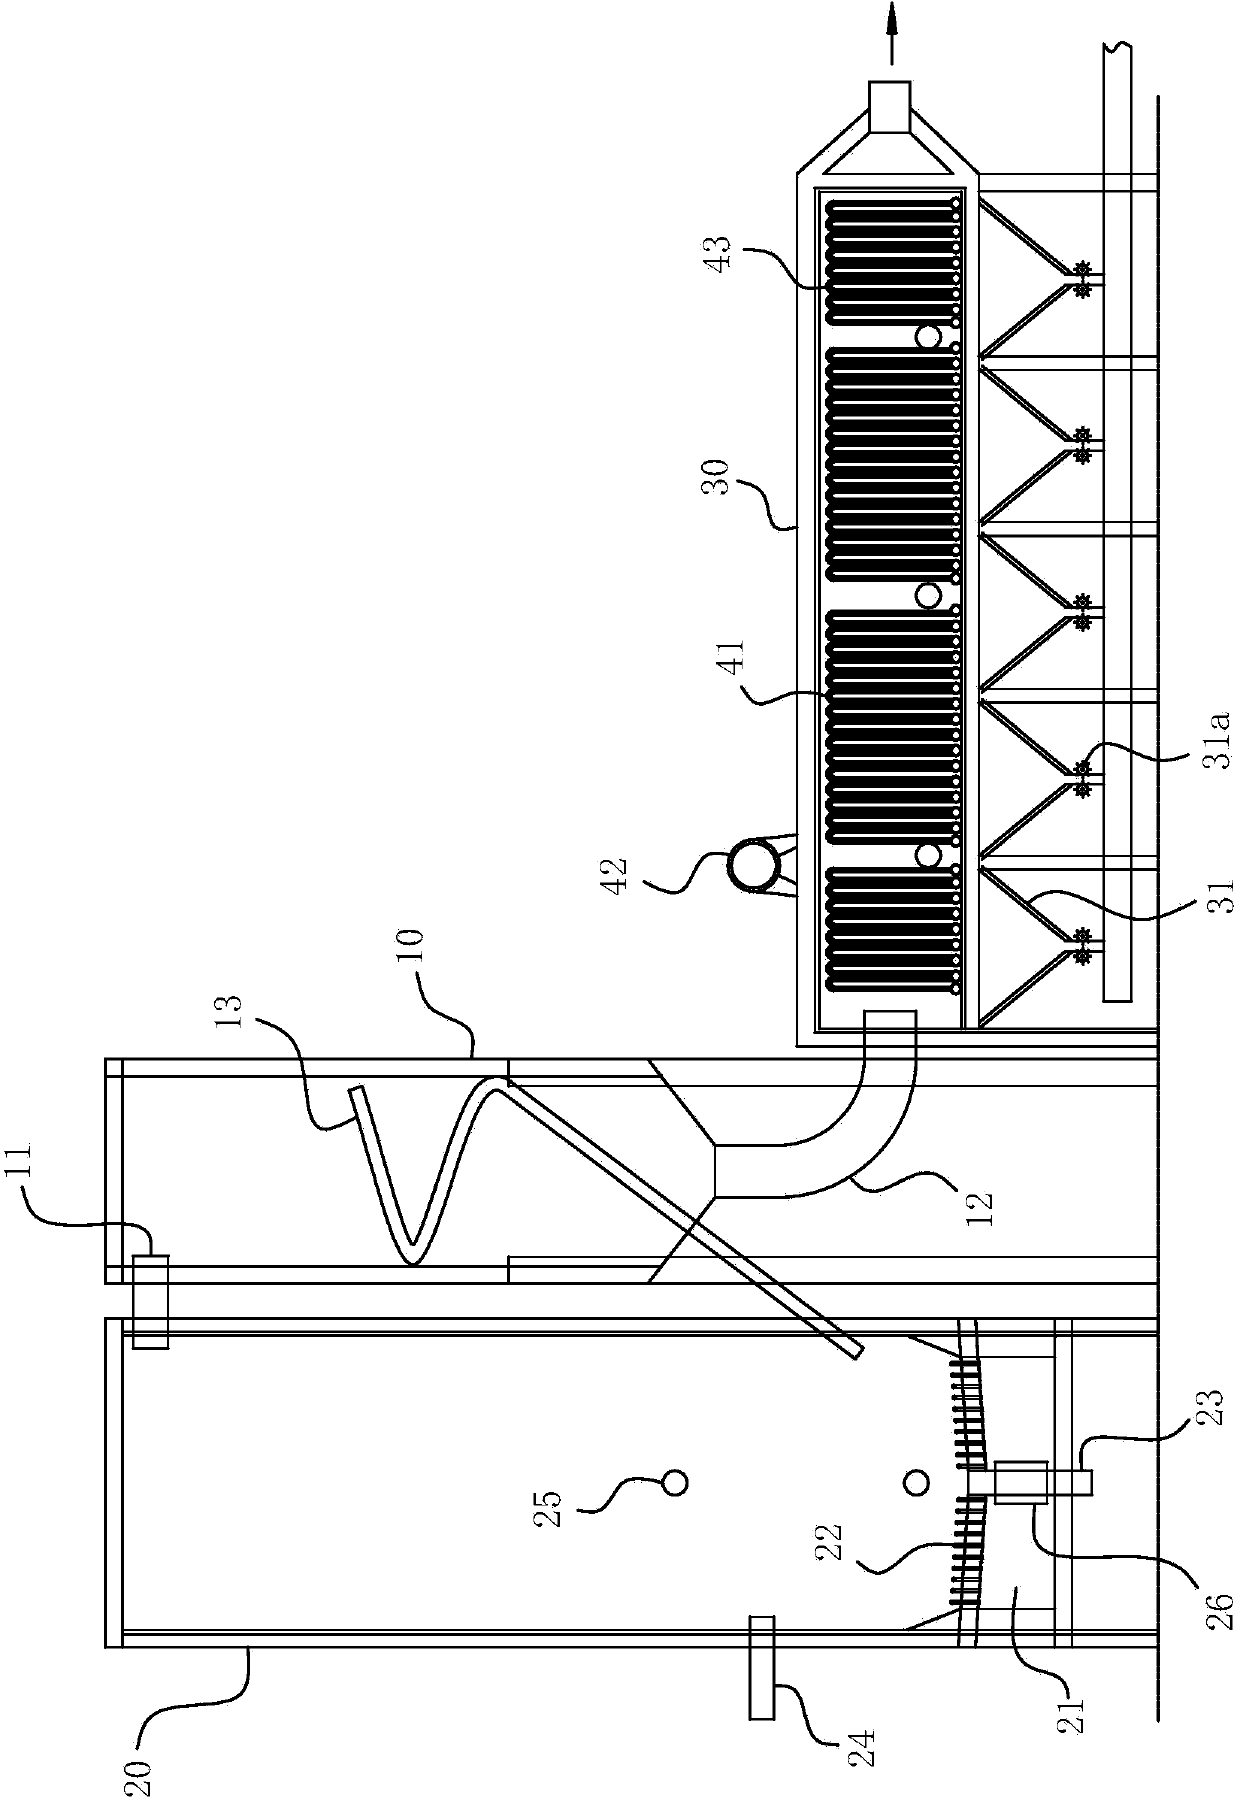 Furnace slag separation assembly and circulating sulfuration bed incinerator using assembly